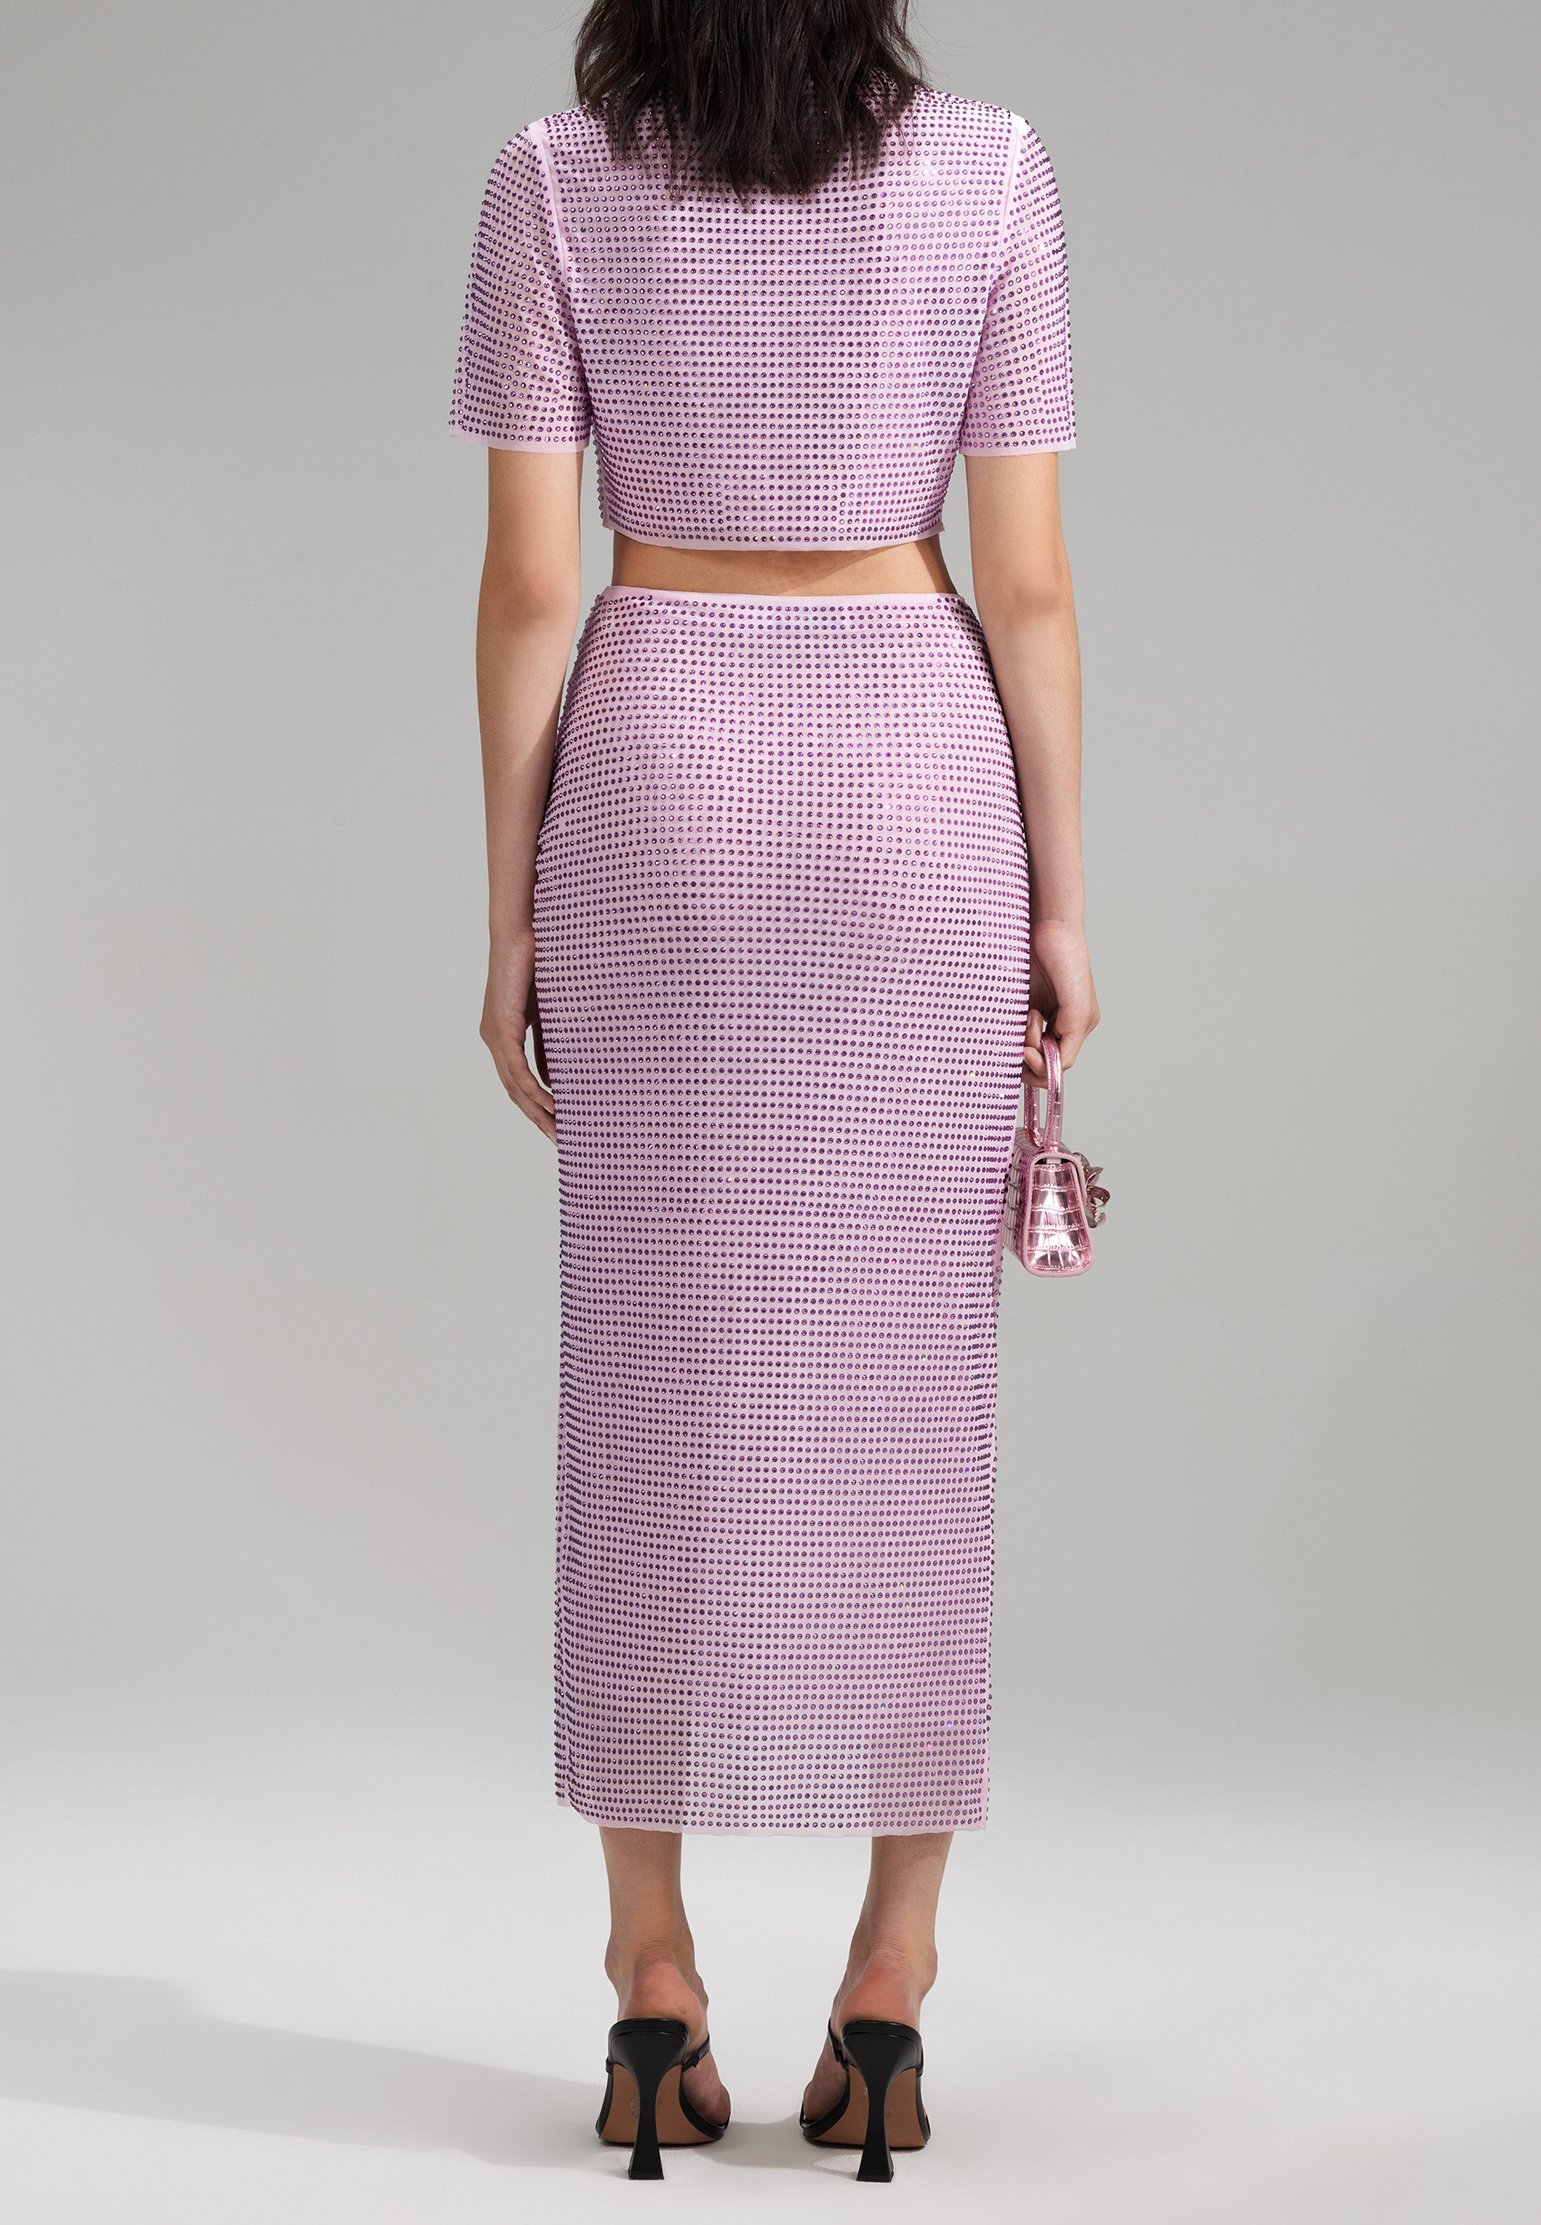 Skirt SELF-PORTRAIT Color: lilac (Code: 2245) in online store Allure